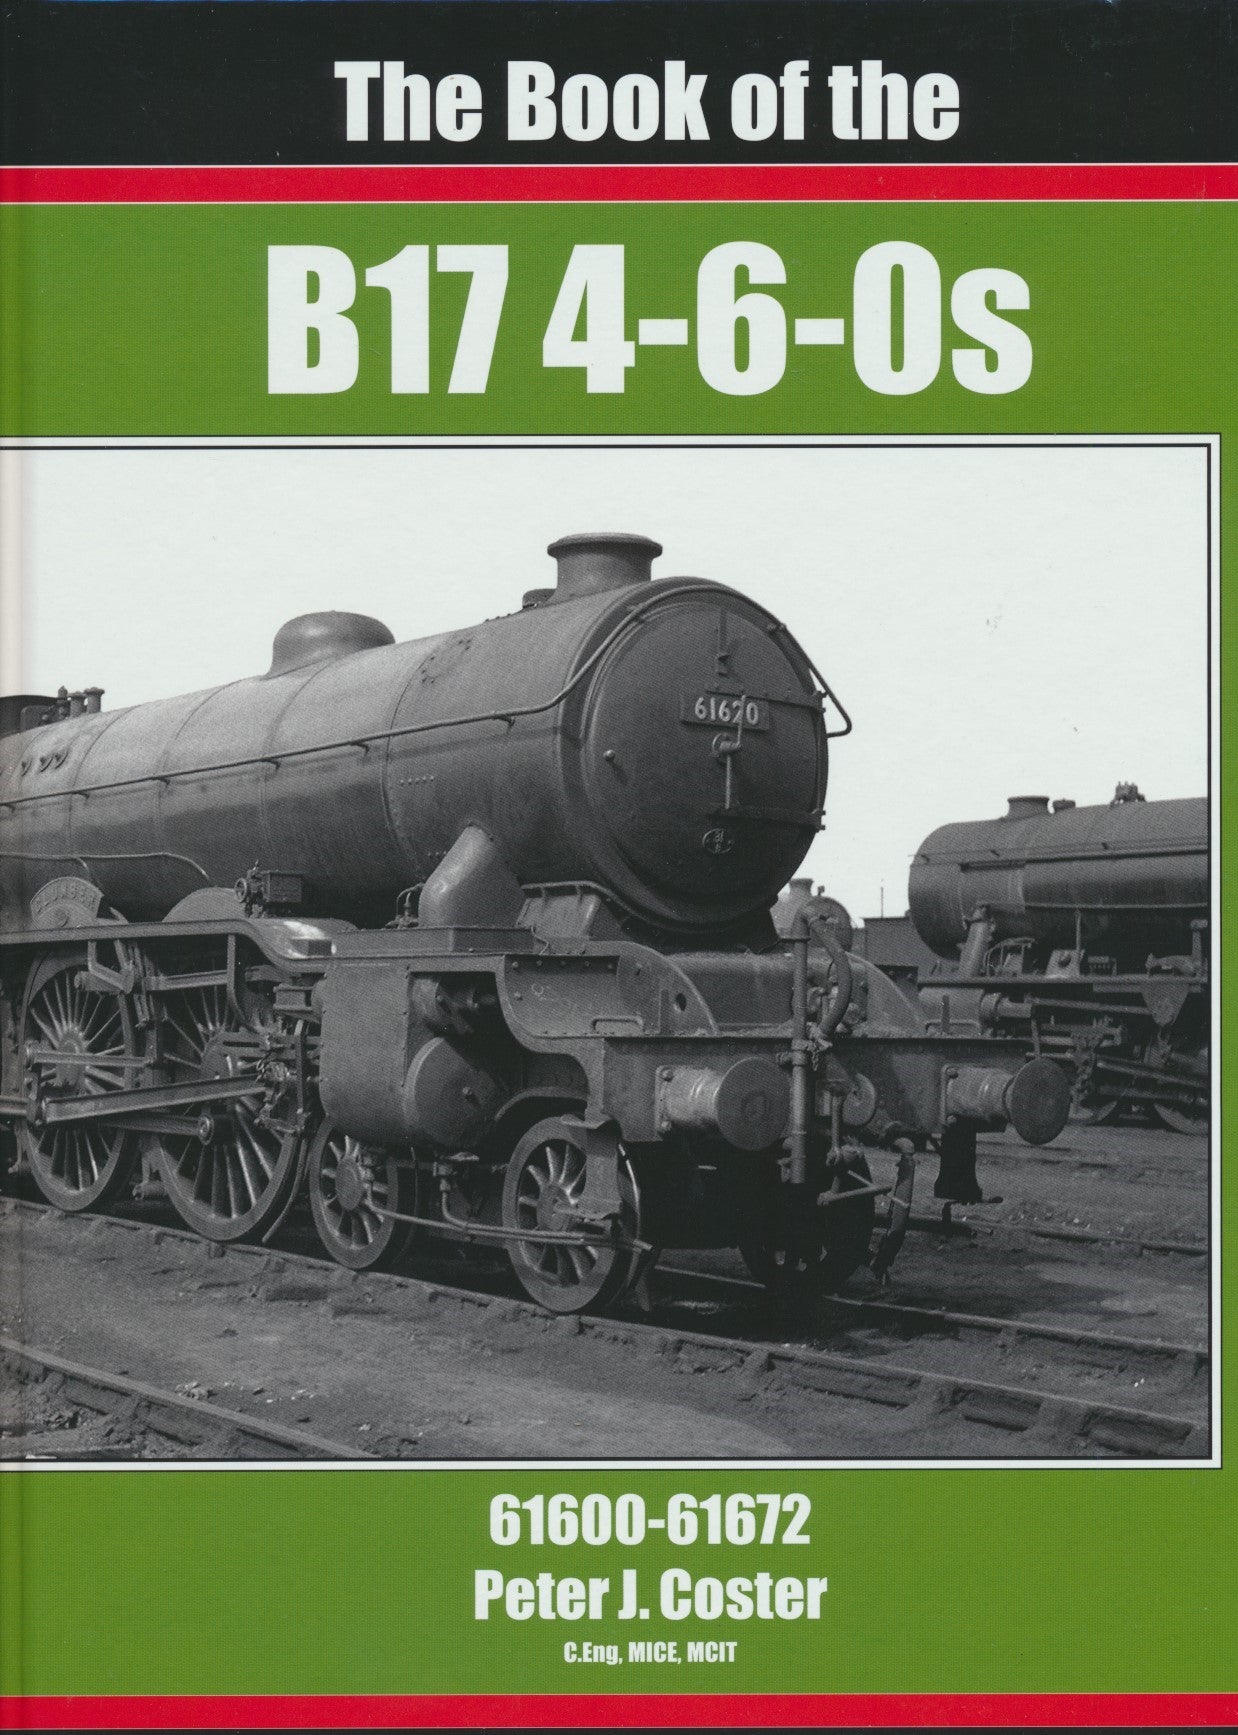 The Book of the B17 4-6-0s Nos. 61600-61672